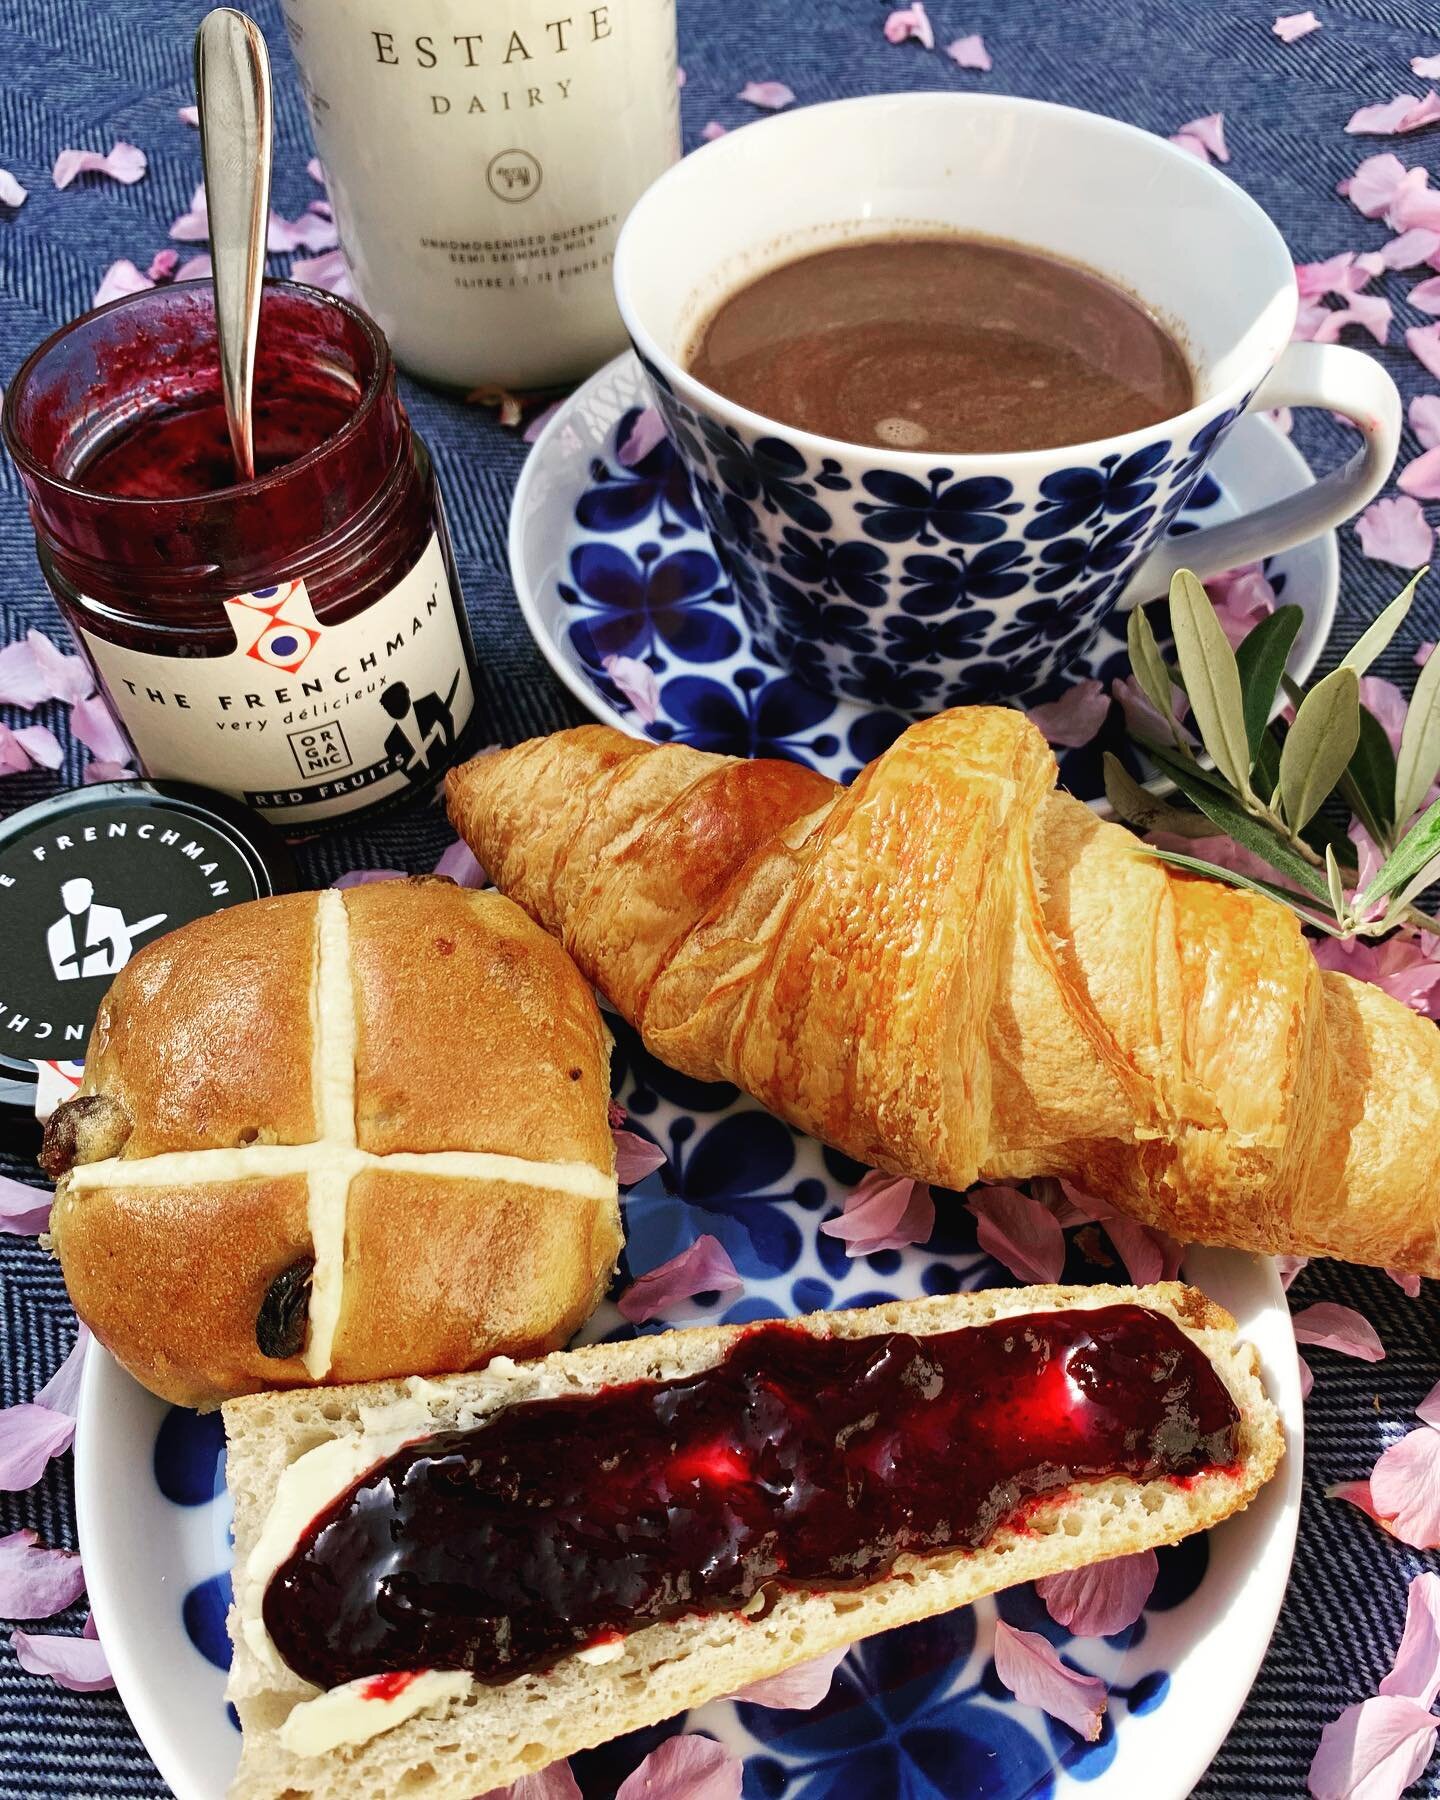 Easter weekend in London, THE FRENCHMAN couldn&rsquo;t resist to try some warm cross buns. Delicious!
Home made hot chocolate with @theestatedairy milk and @vanhoutenprofessional cocoa.
Fresh baguette with unsalted butter and our award-winning organi